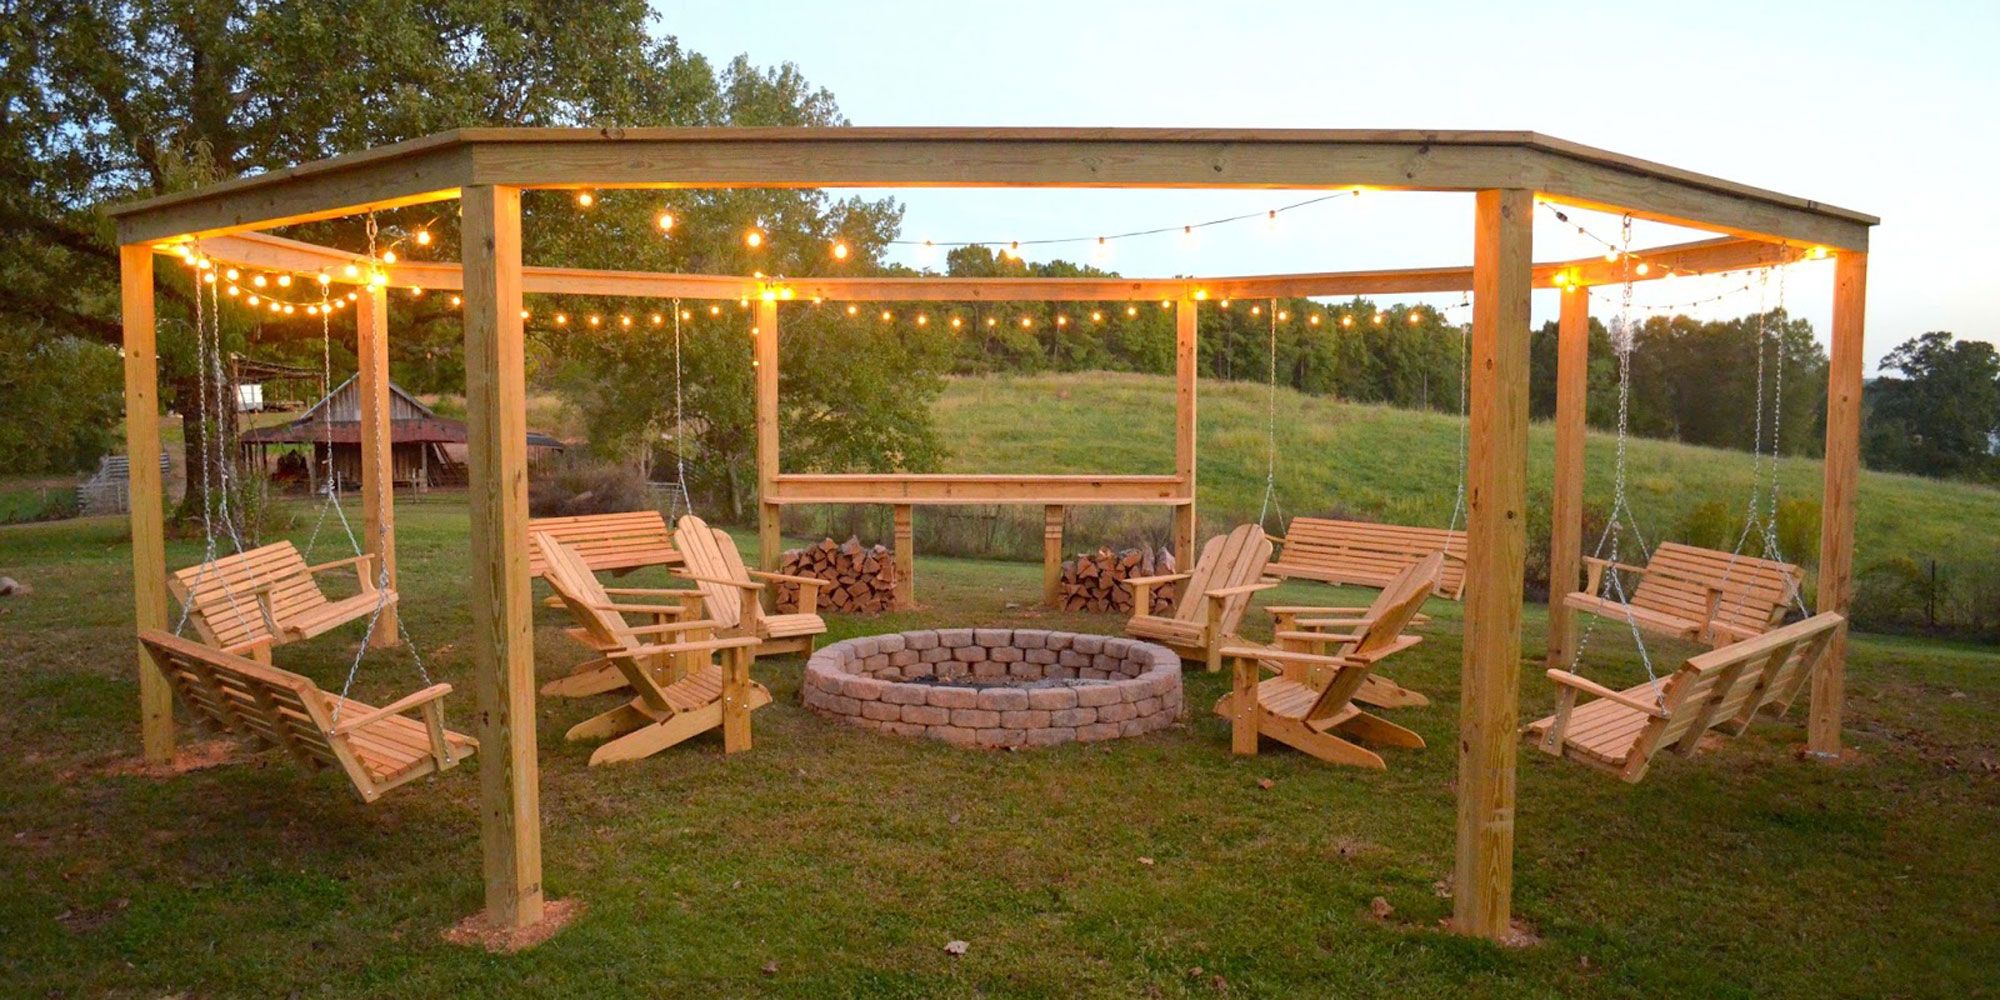 This Diy Backyard Pergola Is The, How To Build Fire Pit Patio